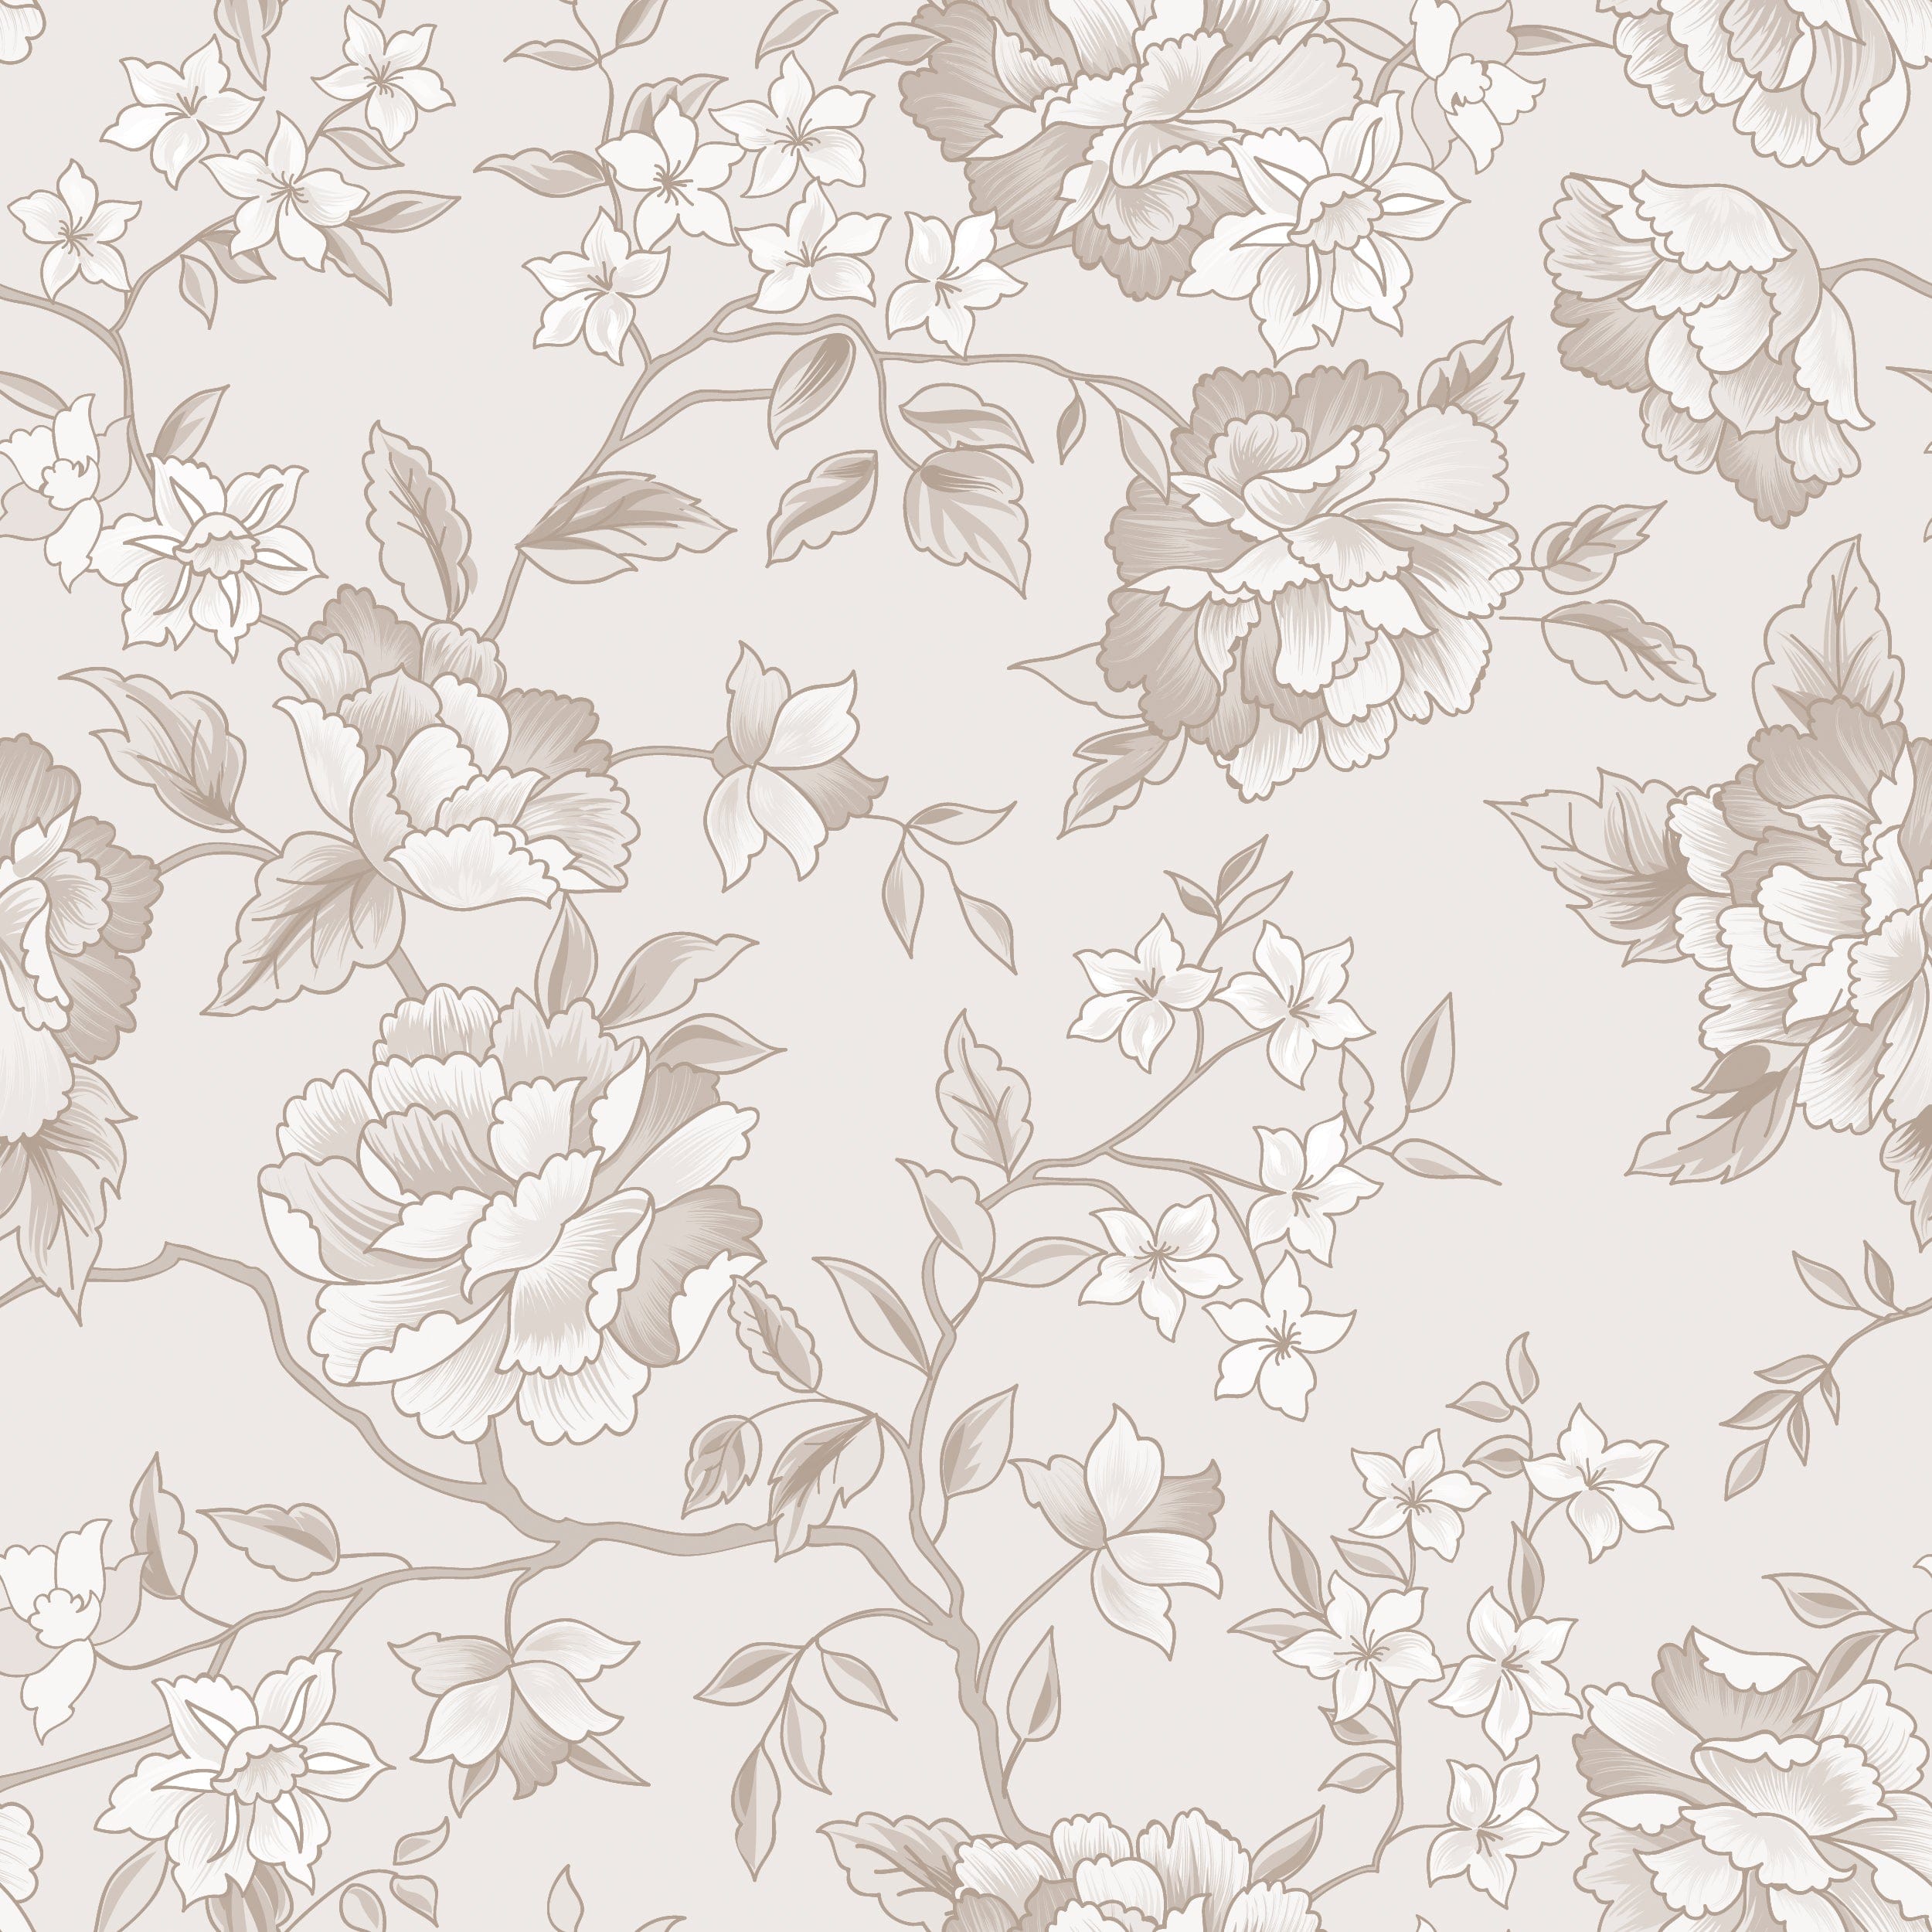 A close-up of the Ornamental Garden Wallpaper, showing the rich detail of its beige floral pattern, with large blooming flowers and leafy branches. The design captures a timeless beauty with a sense of depth and texture.